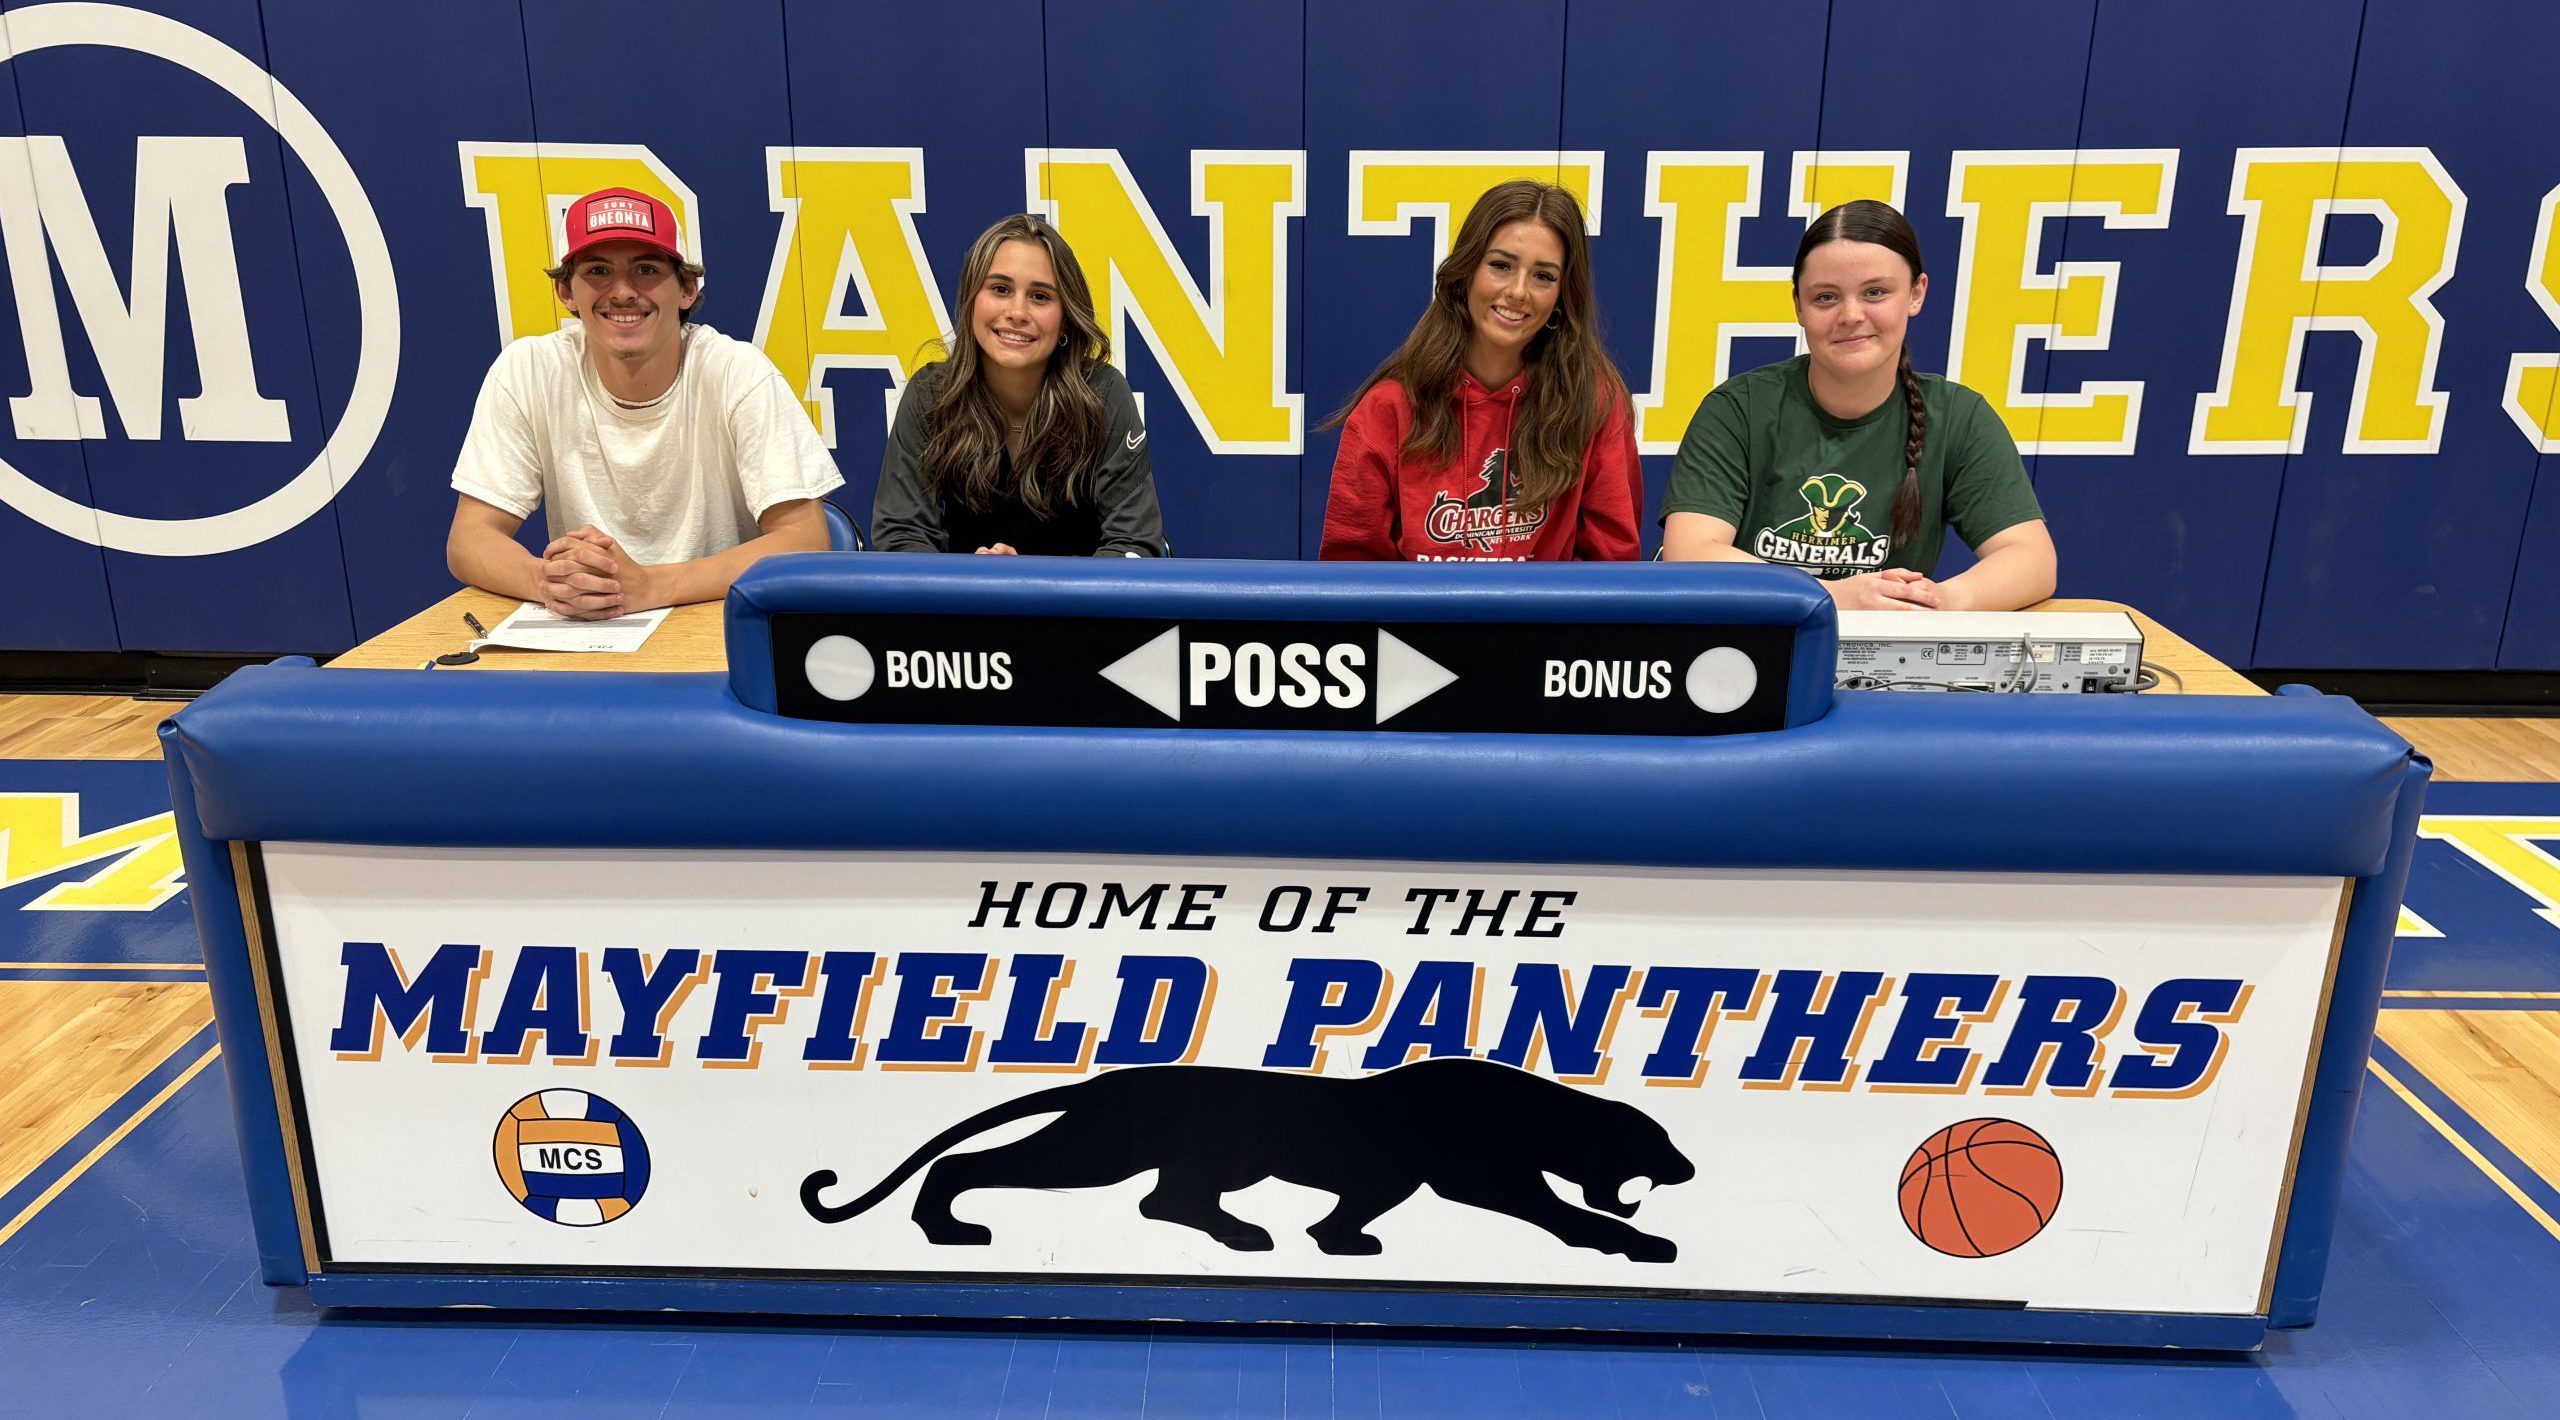 four student athletes sit behind a podium reading "Mayfield Panthers"